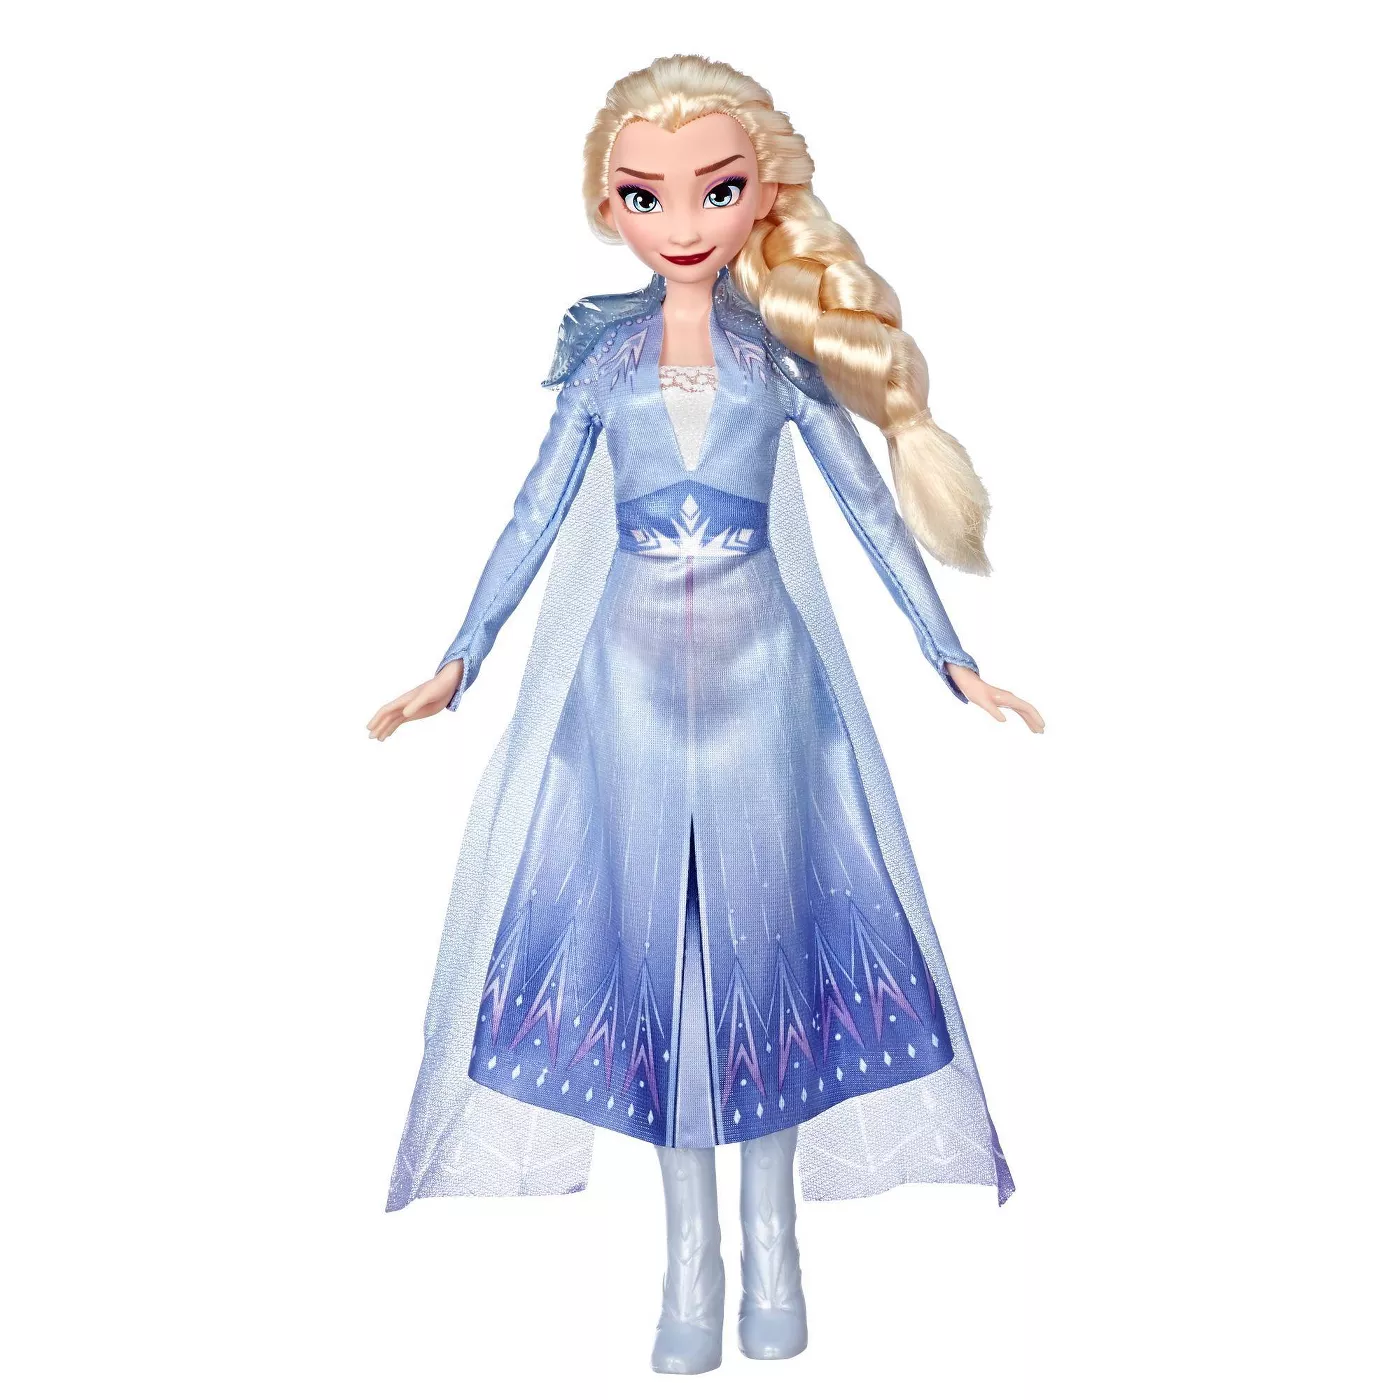 Disney Frozen 2 Elsa Fashion Doll With Long Blonde Hair and Blue Outfit - image 1 of 2